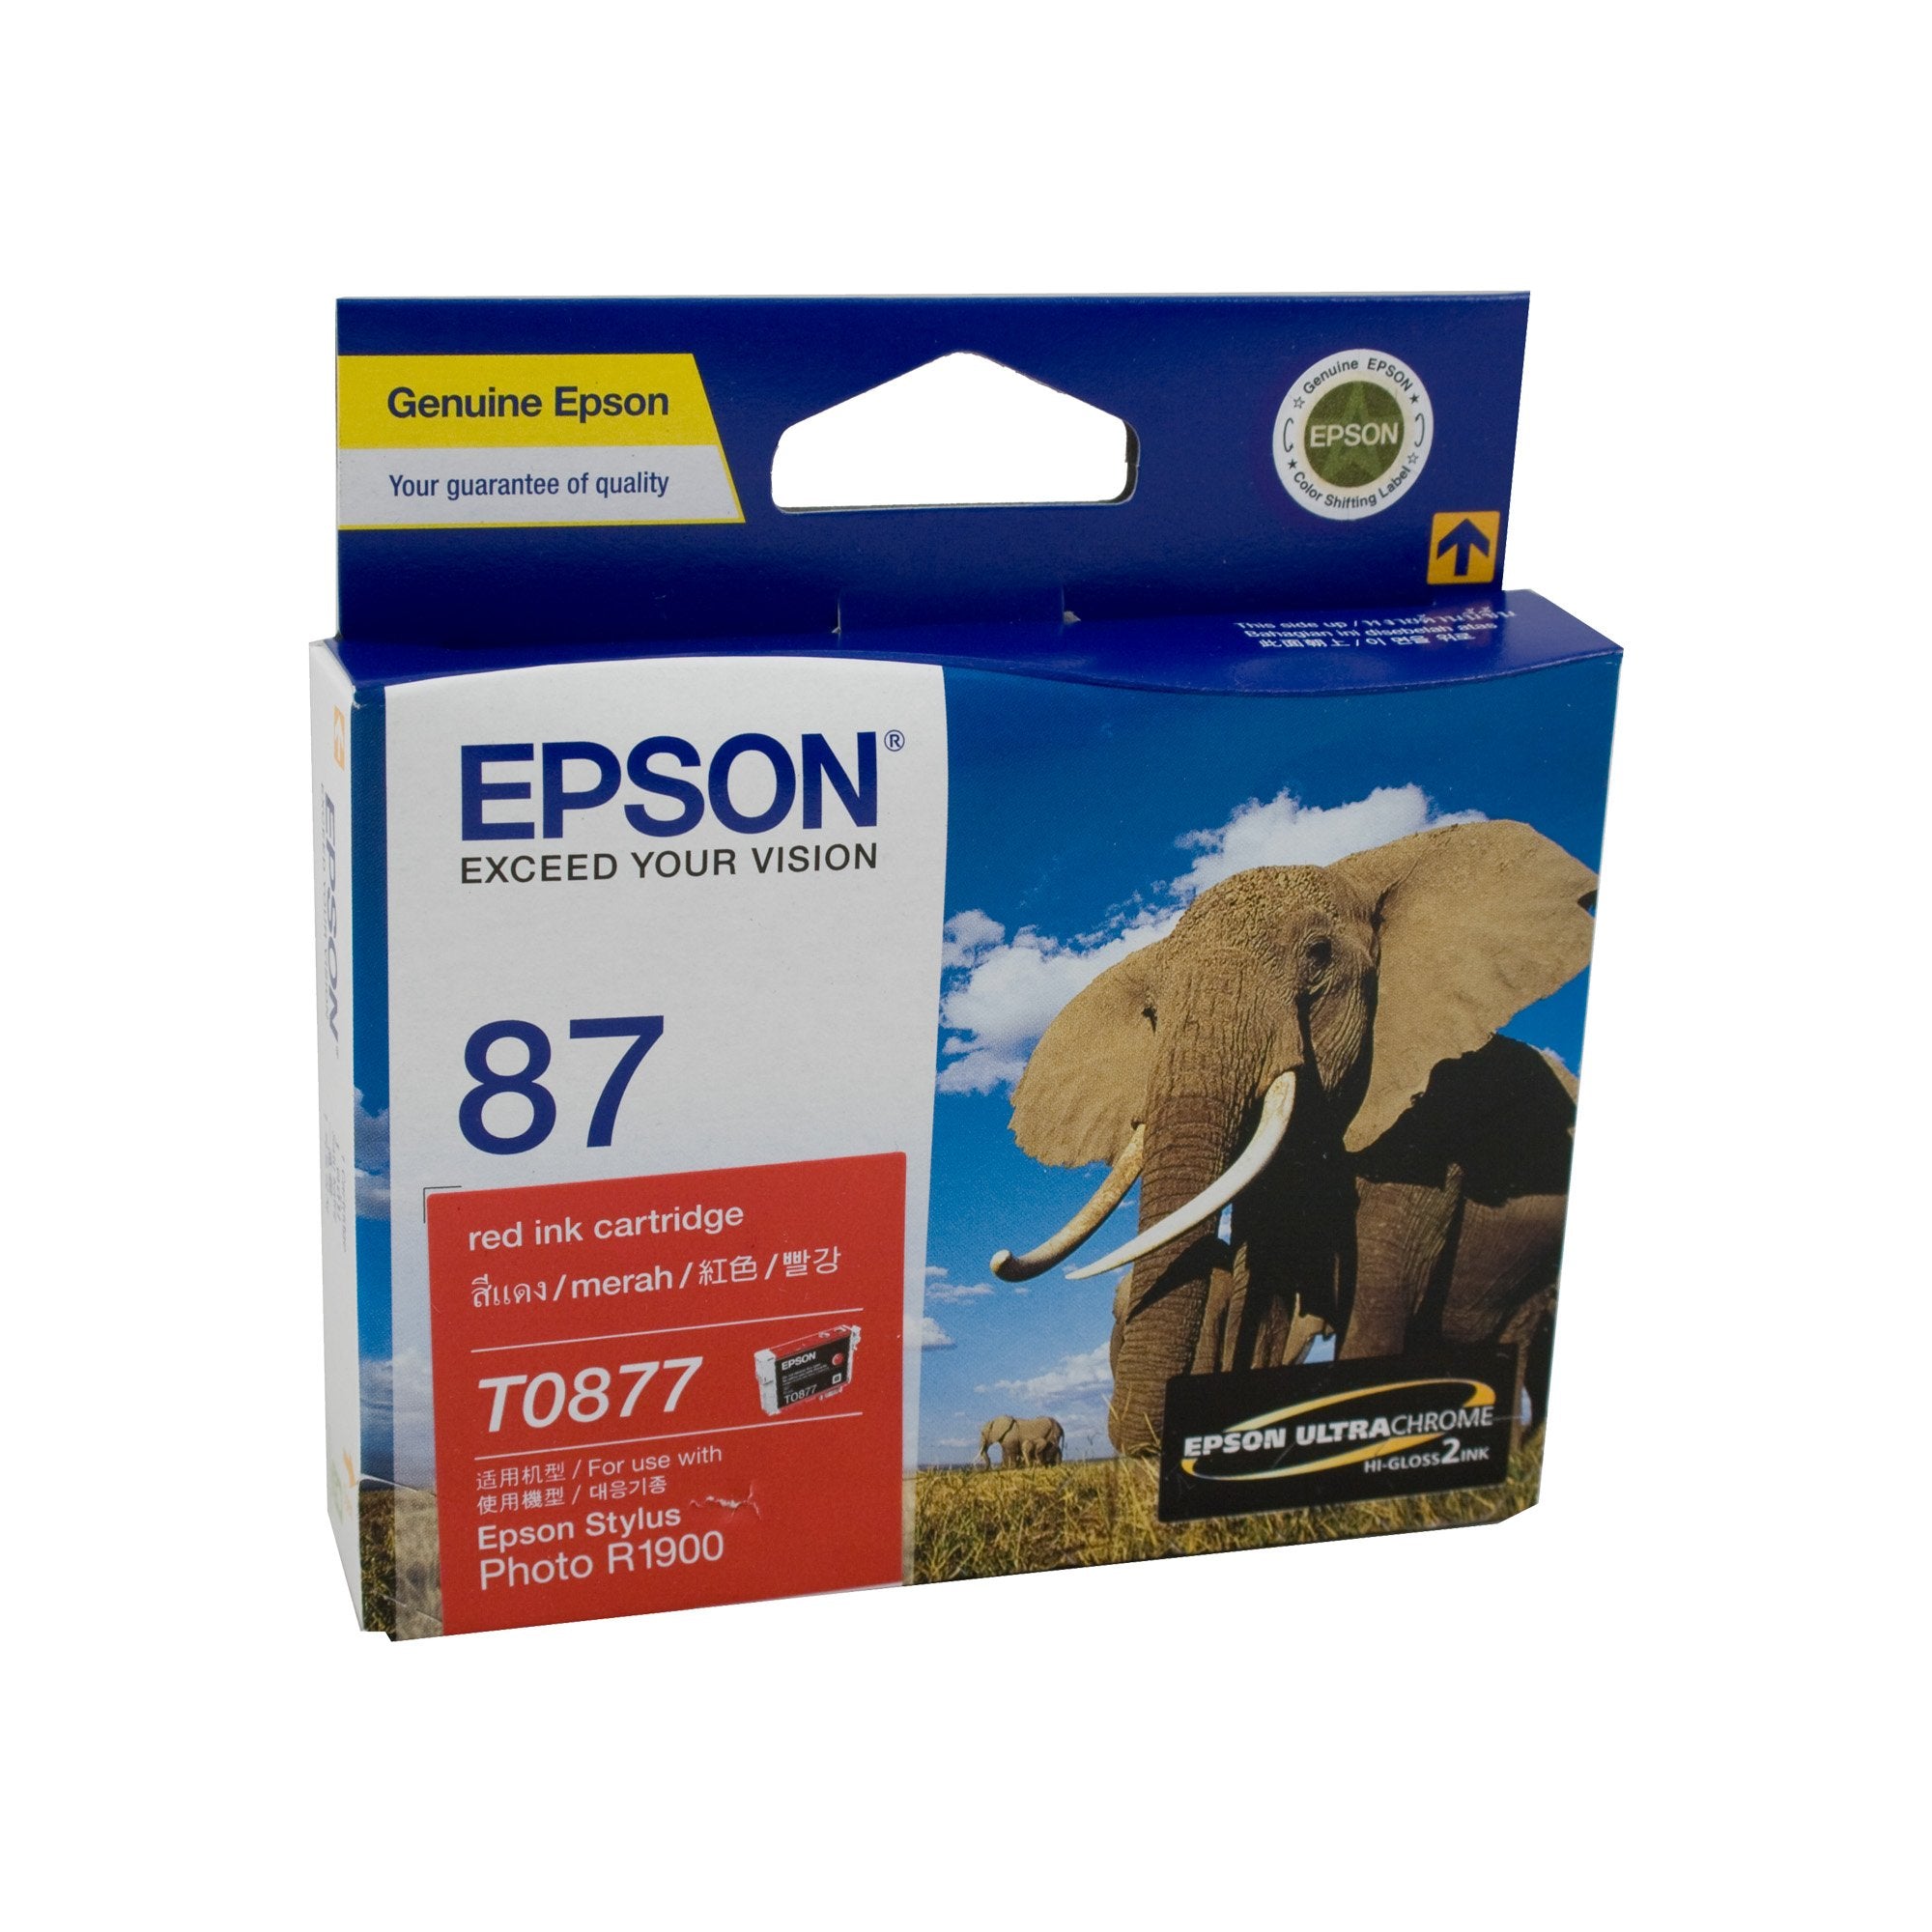 Epson C13T087790 Red Ink Cartridge